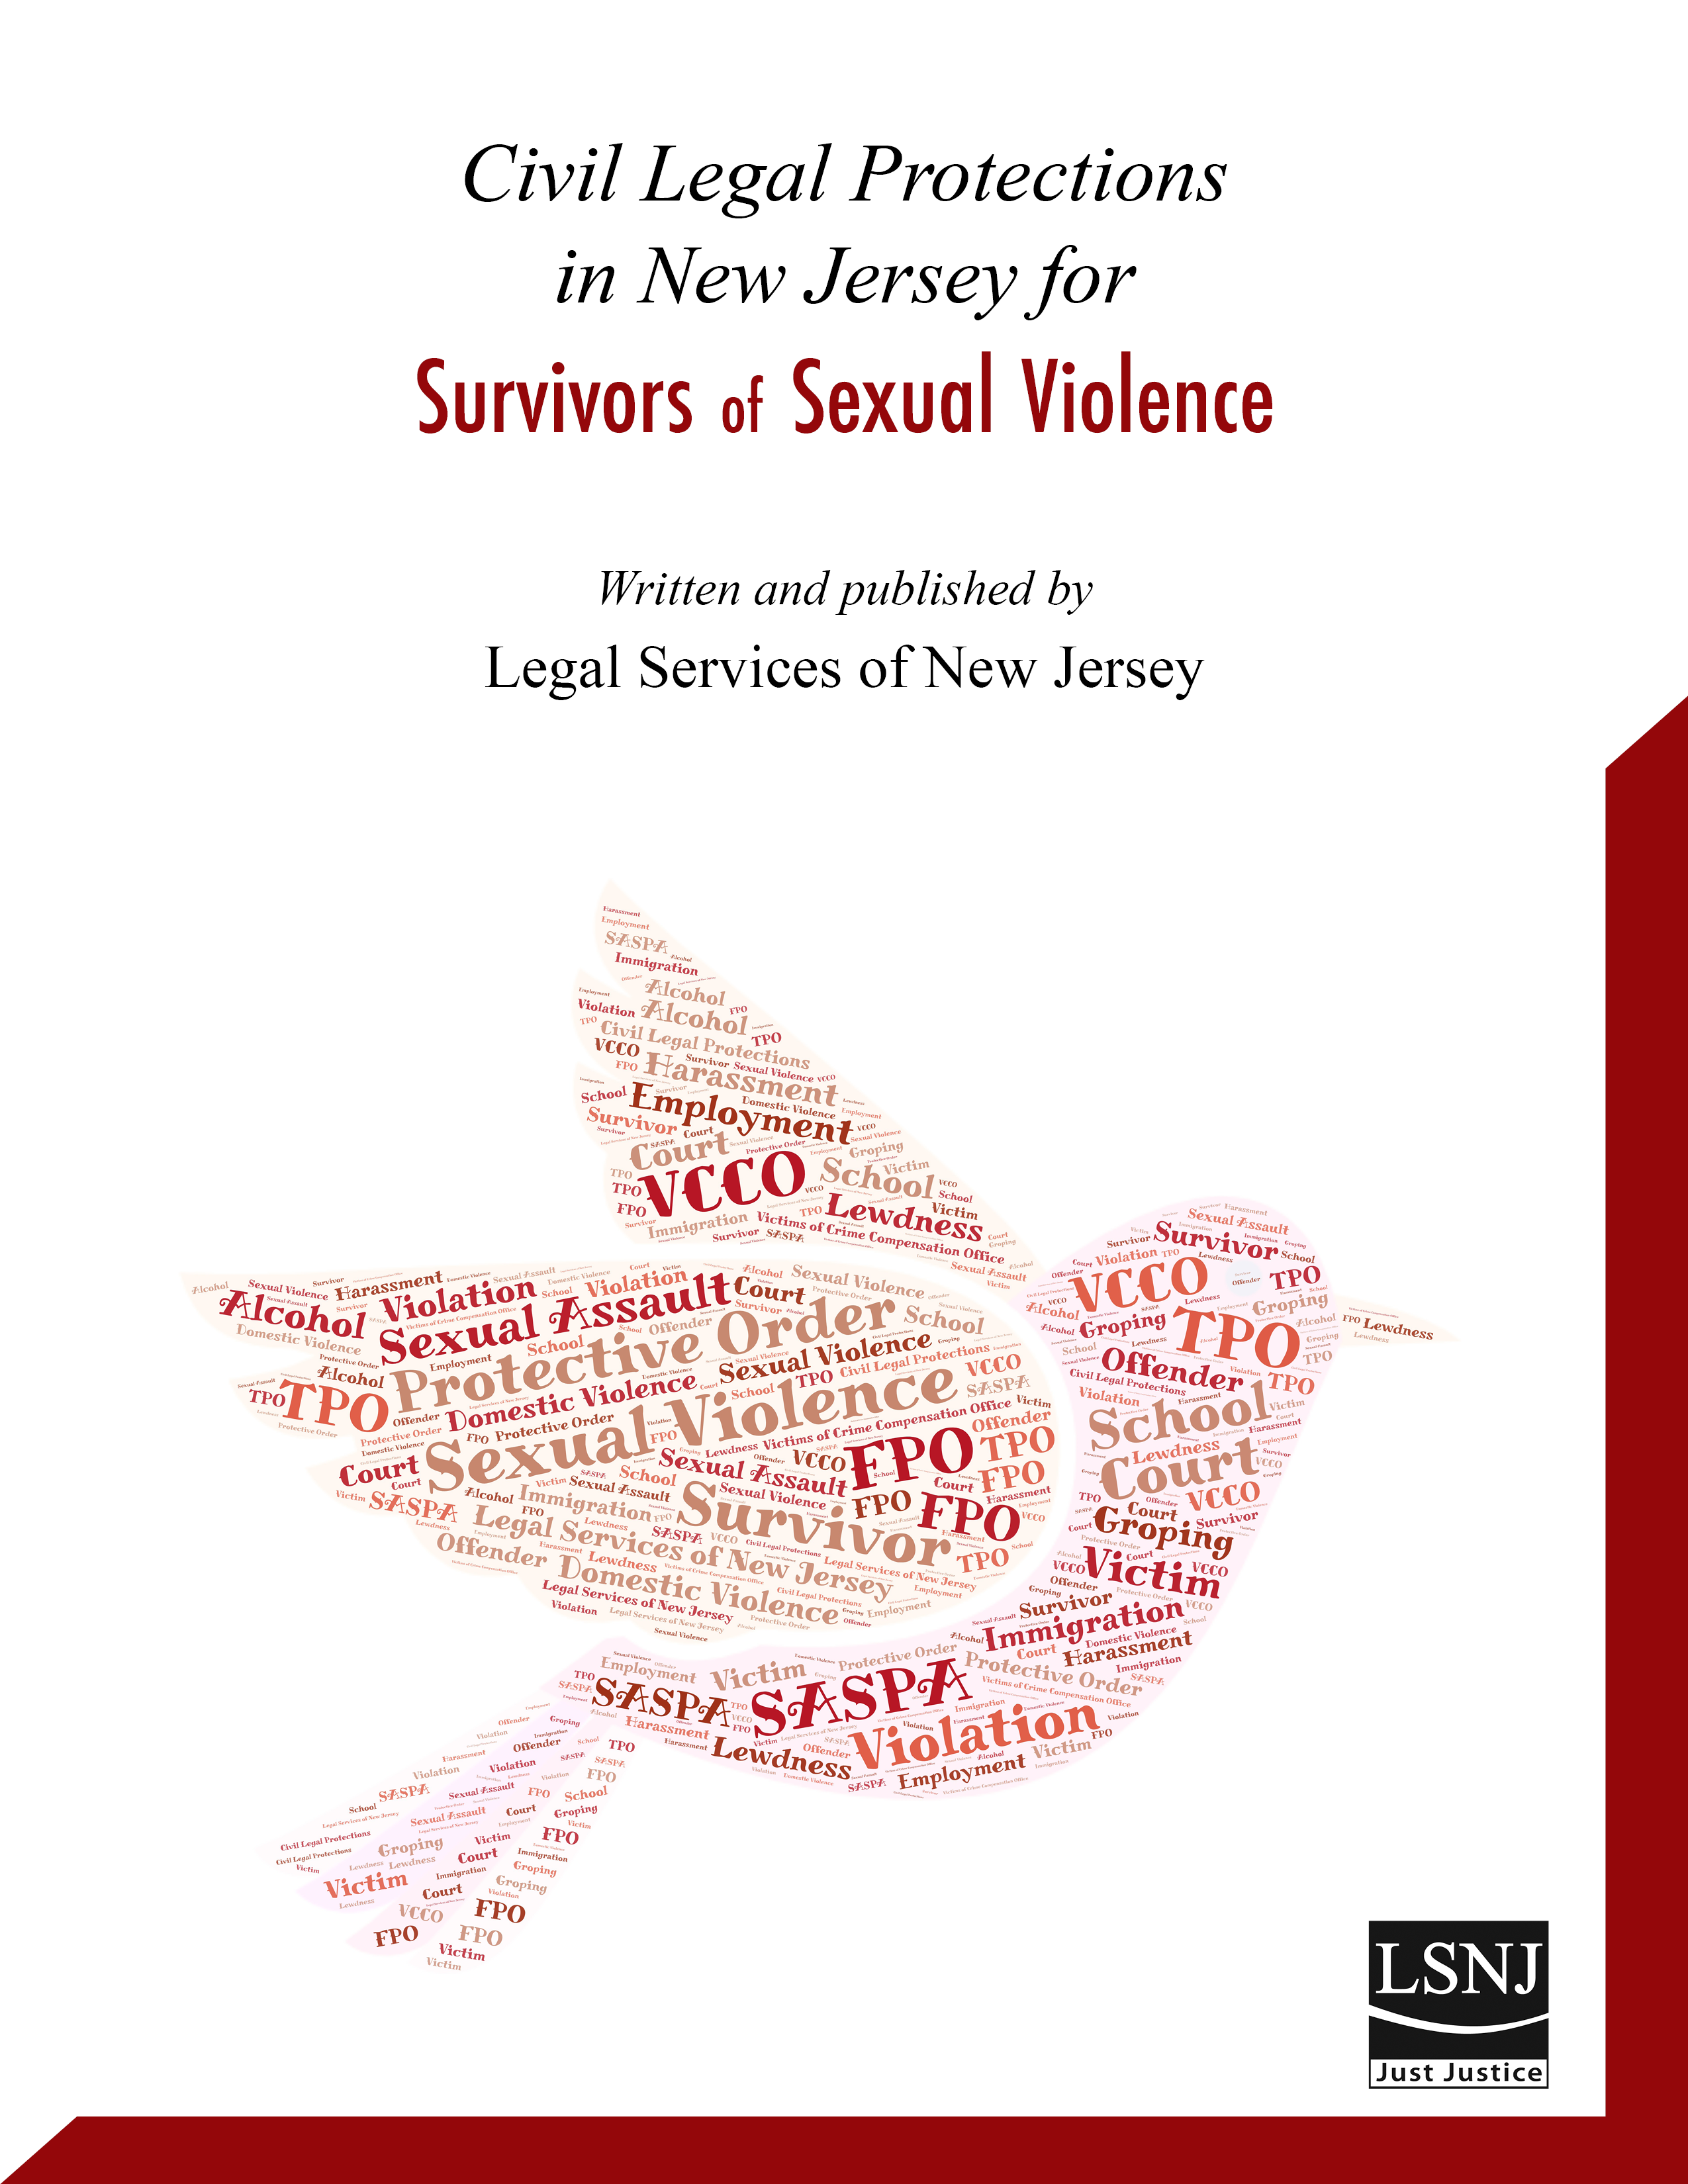 Civil Legal Protections in New Jersey for Survivors of Sexual Violence